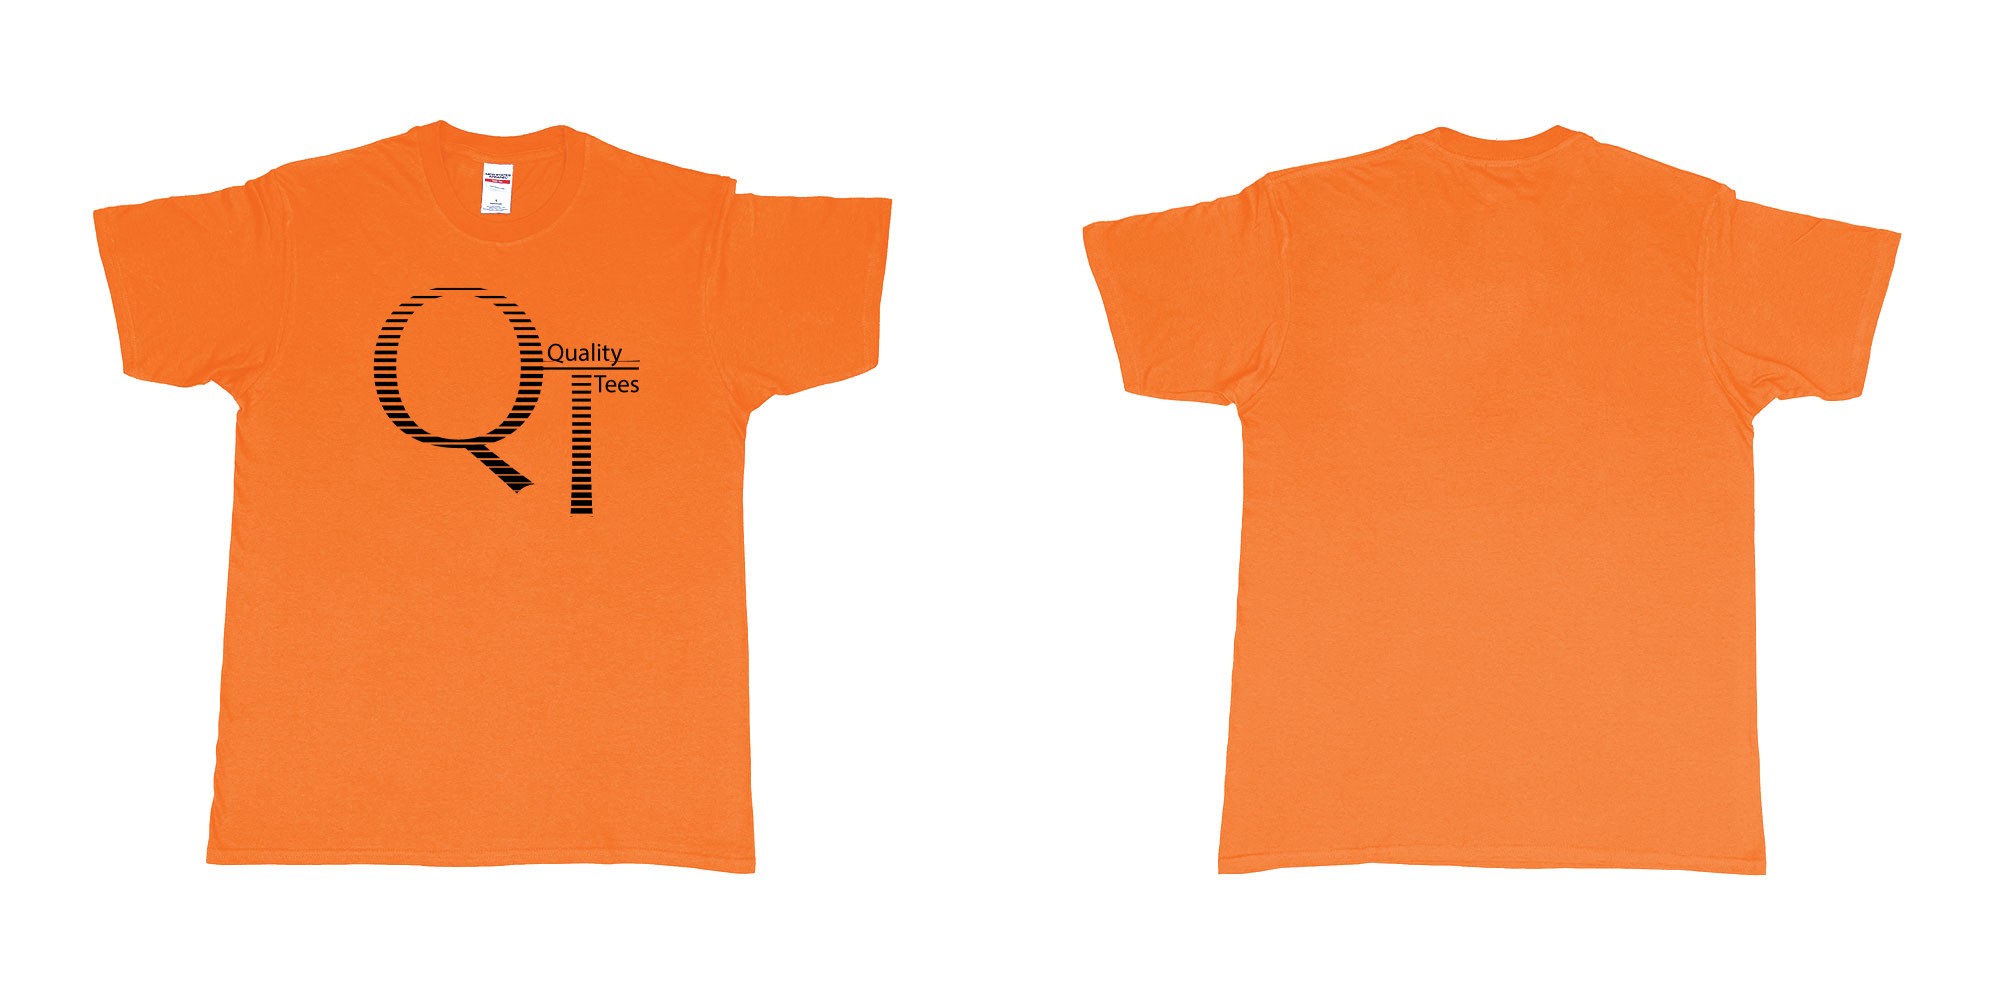 Custom tshirt design quality teeshirts in fabric color orange choice your own text made in Bali by The Pirate Way